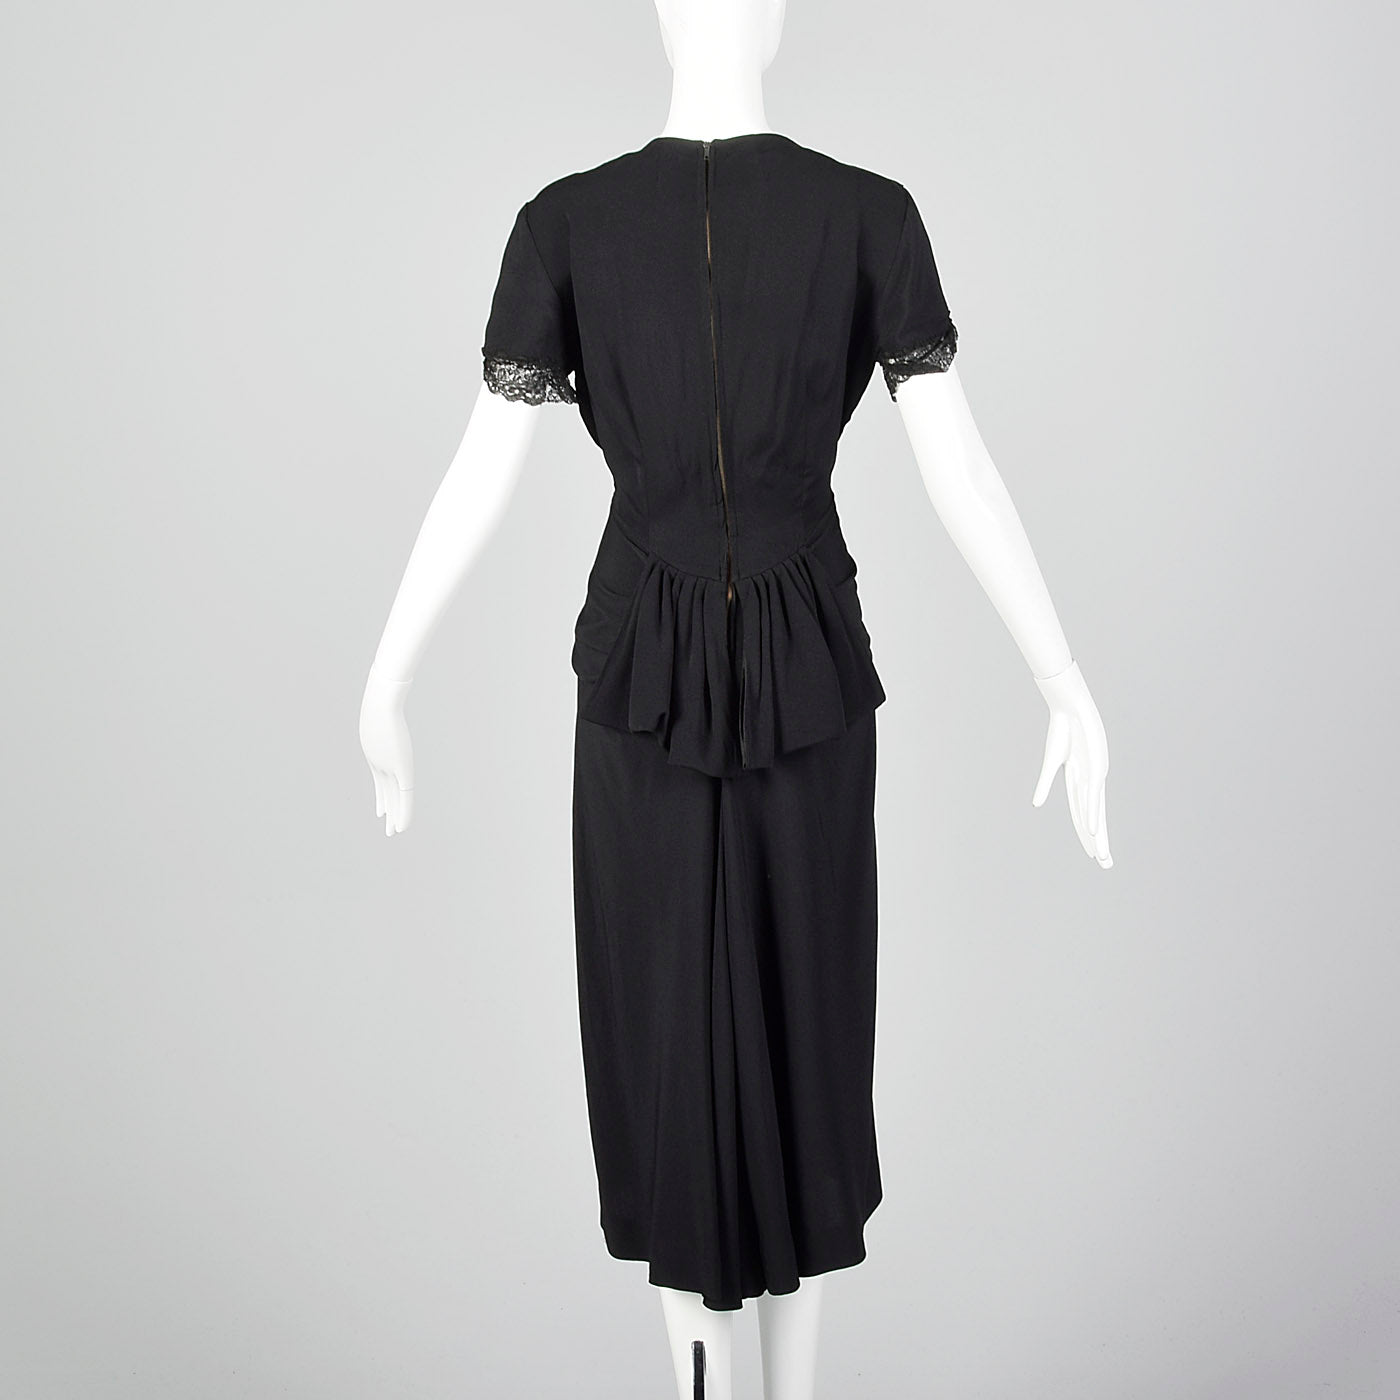 1940s Black Peplum Dress with Lace Collar and Cuffs